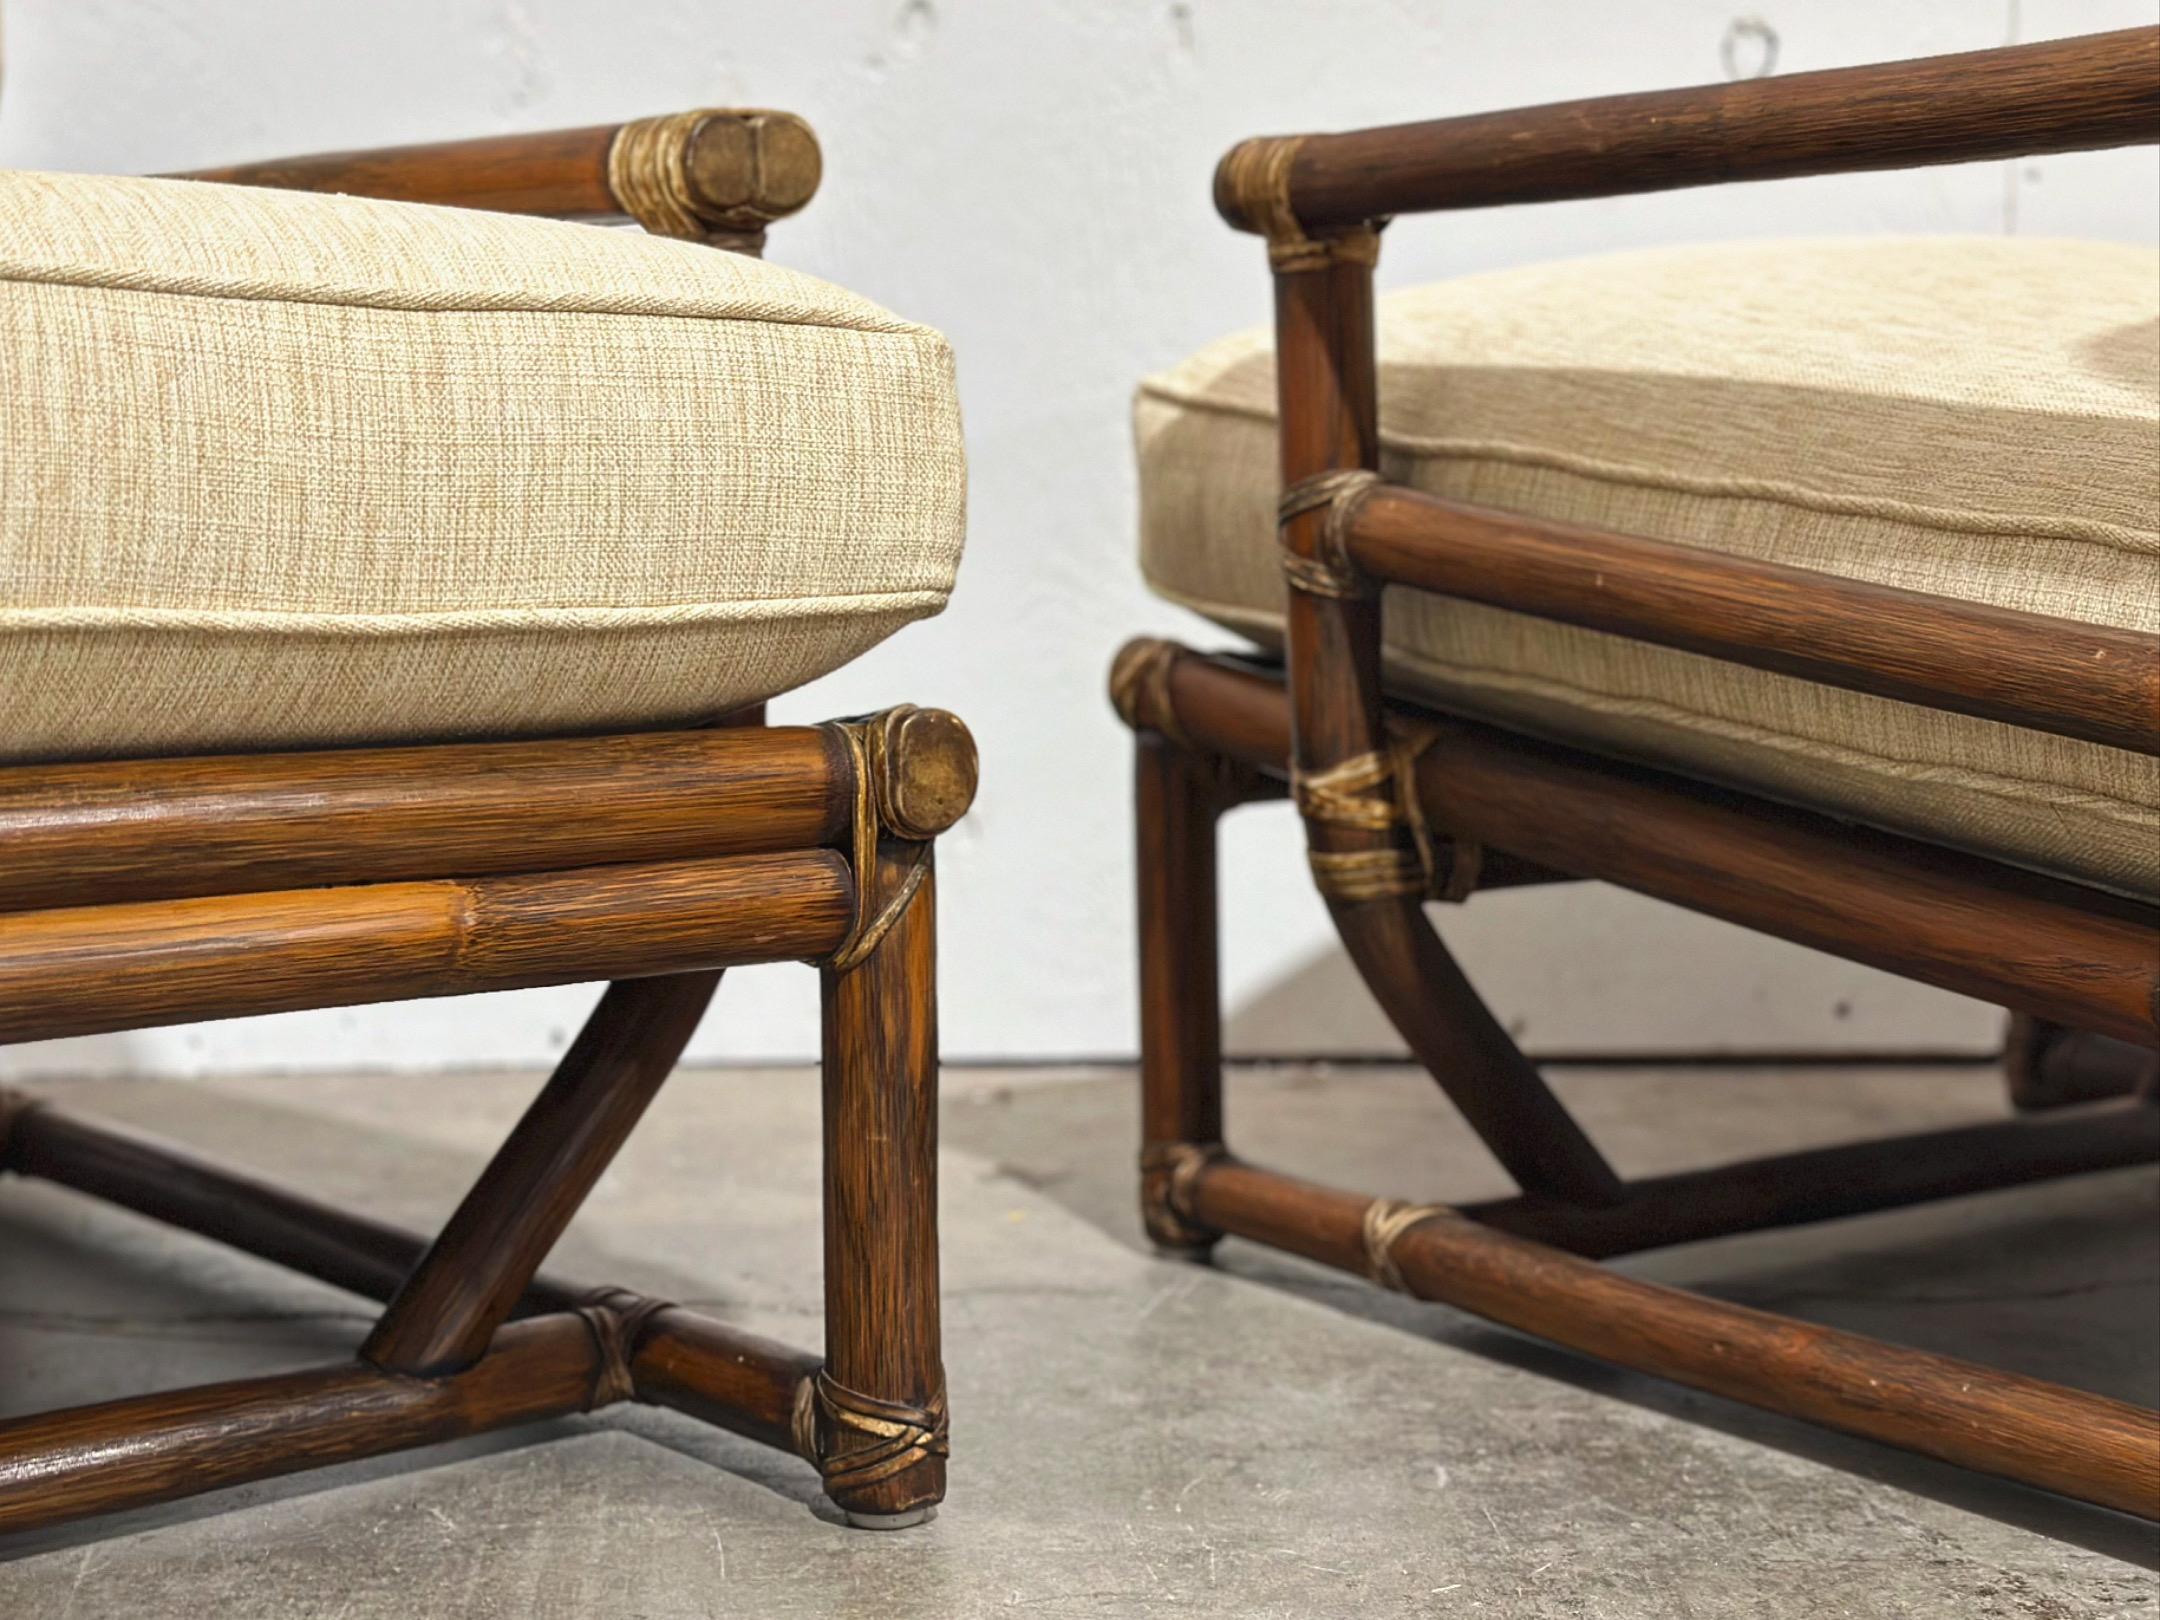 Pair of substantial mid century organic modern bamboo rattan lounge chairs by McGuire, circa 1973. Rawhide leather strapping joinery and end caps. Exquisite craftsmanship and top notch materials. Set includes two lounge chairs. Brass McGuire